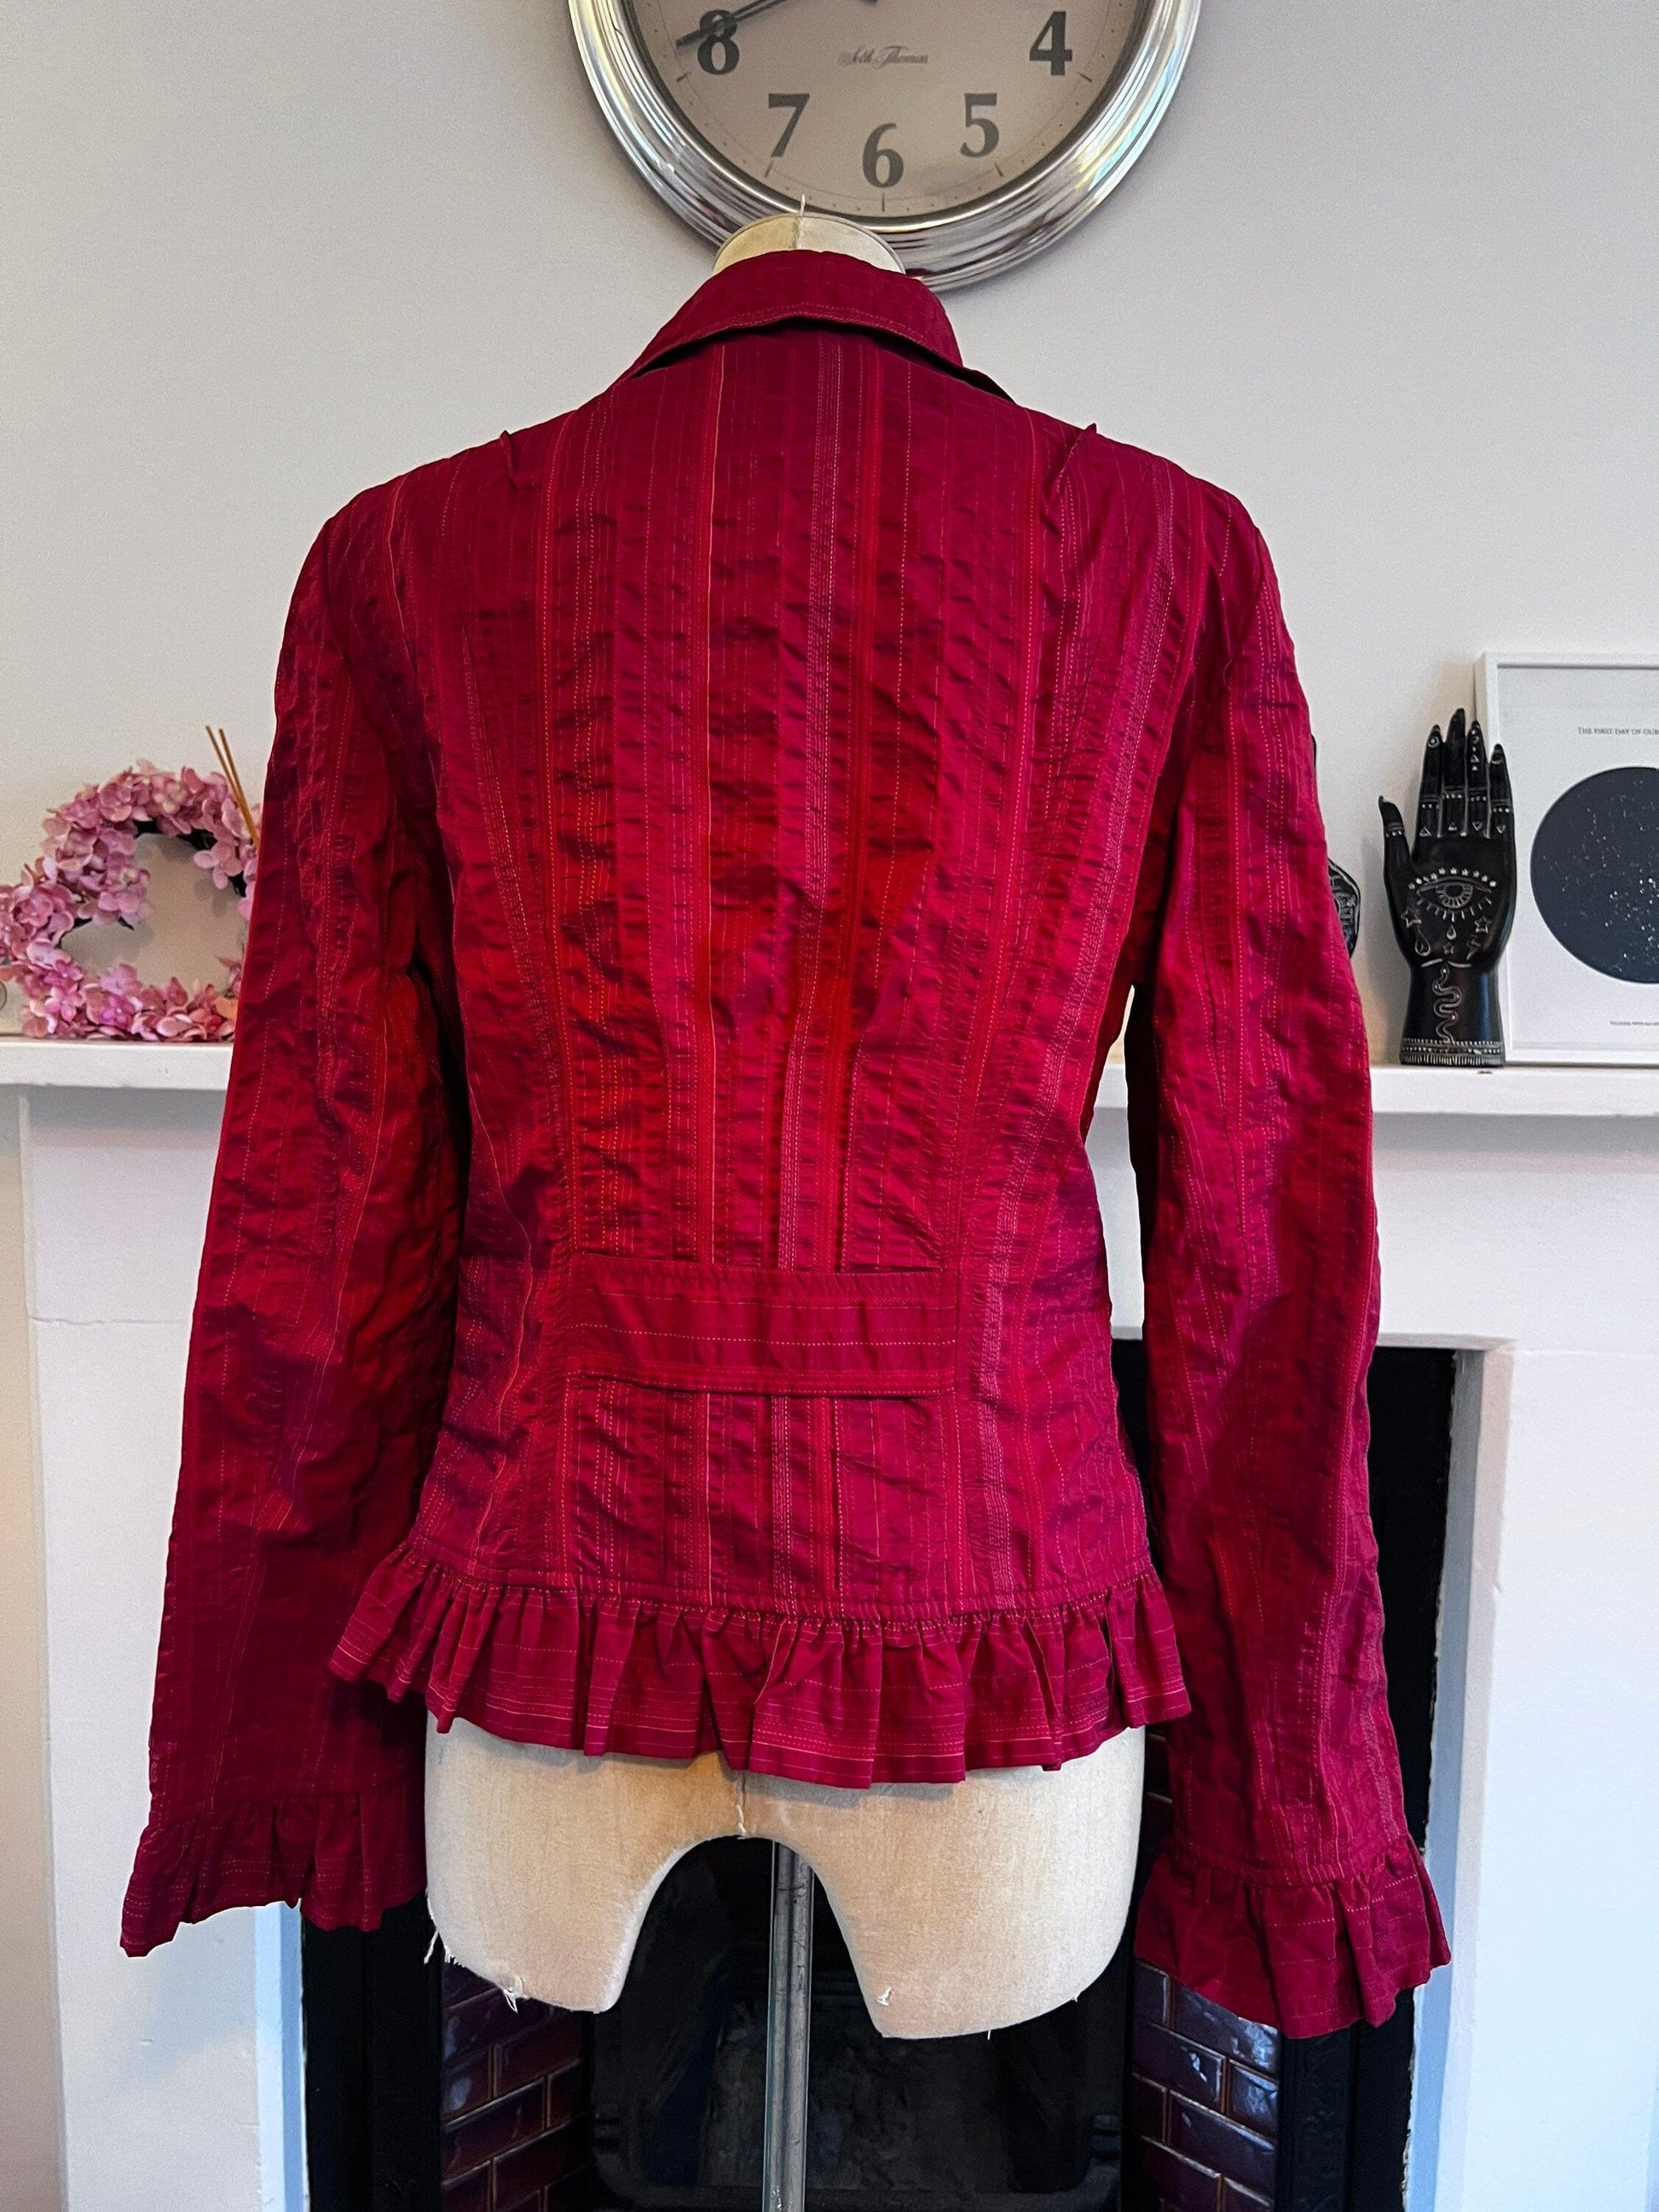 Vintage Red Riding Jacket chunky buttons Scarlet Stripe Blazer Jacket - excellent condition Orwell UK12